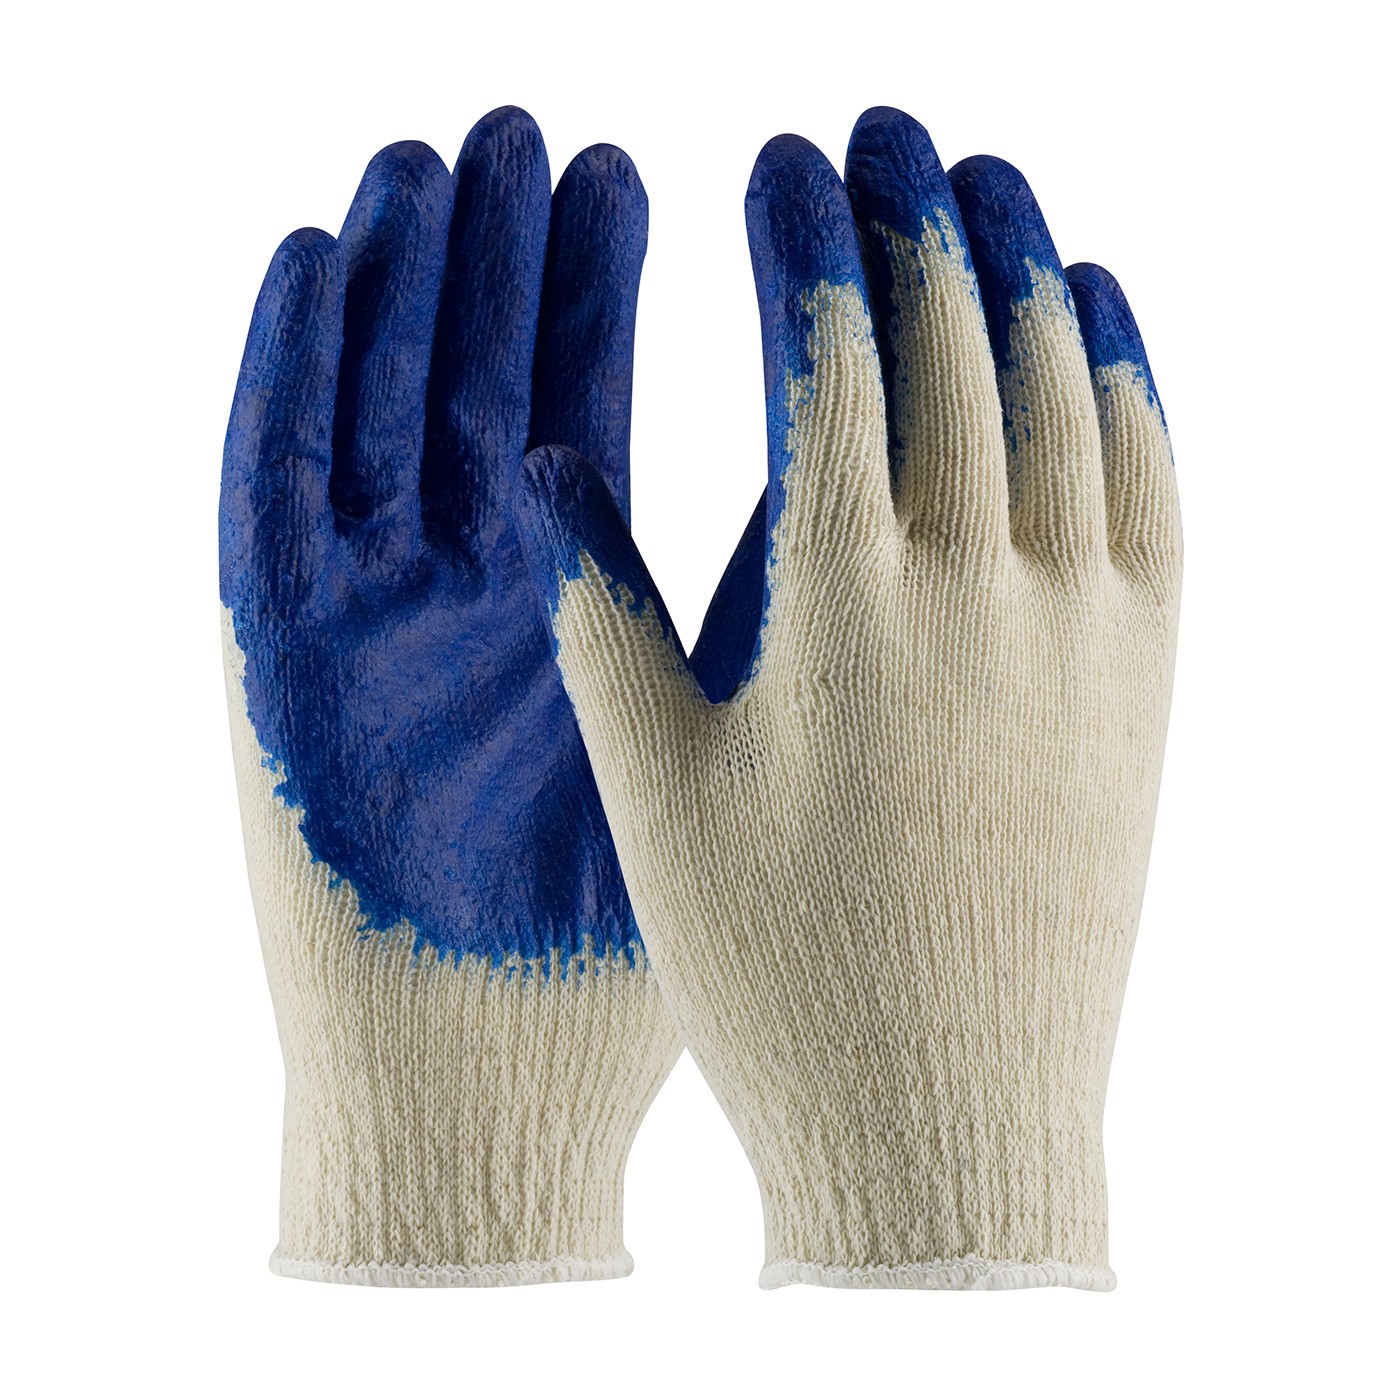 PIP® Seamless Knit Cotton / Polyester Glove with Latex Coated Smooth Grip on Palm & Fingers  (#708SLC)